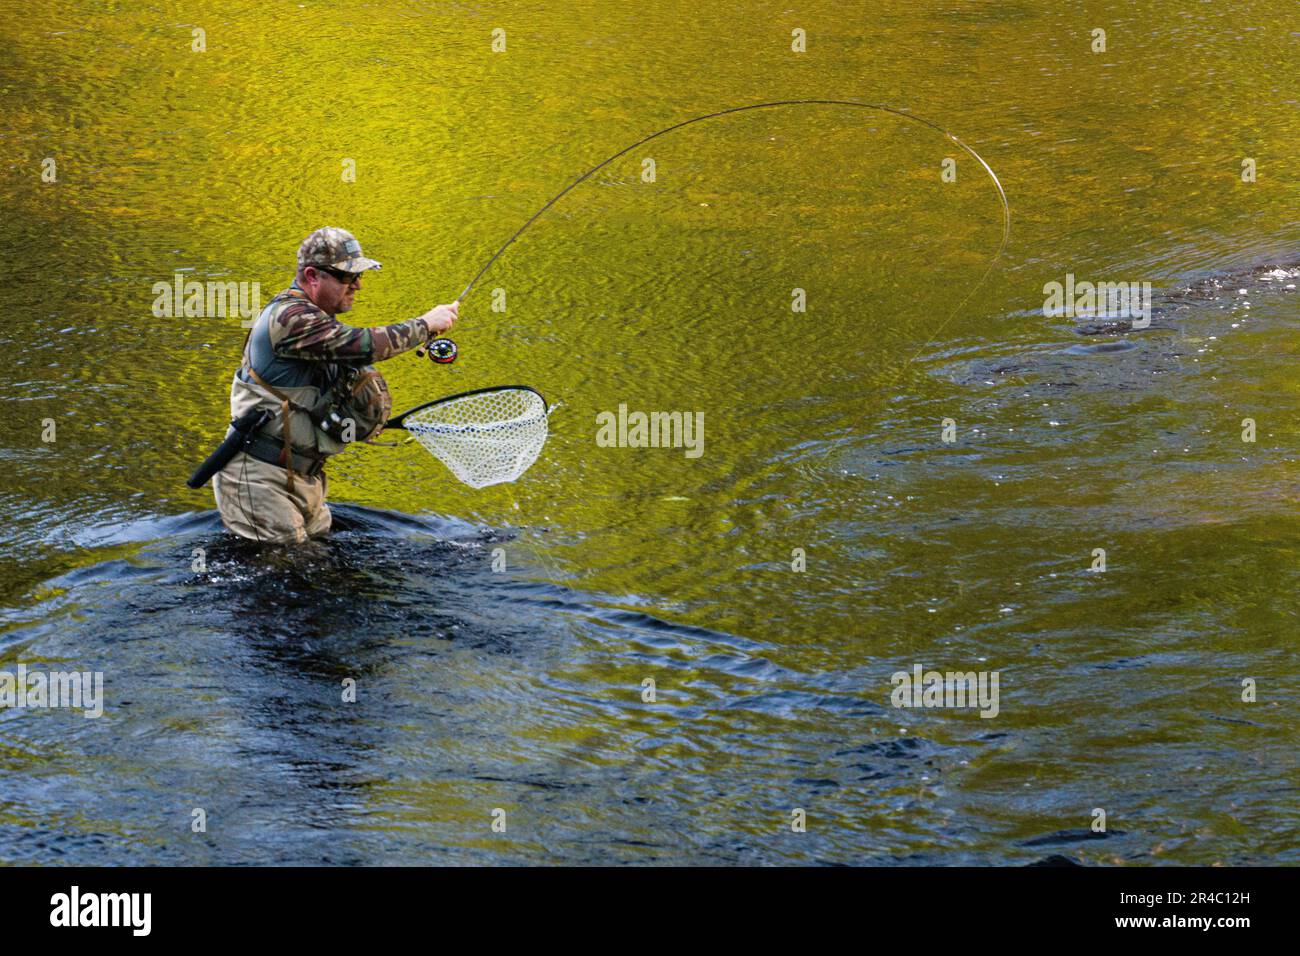 Fisherman the West Branch of the Farmington River American Legion and Peoples State Forests   Barkhamsted, Connecticut, USA Stock Photo